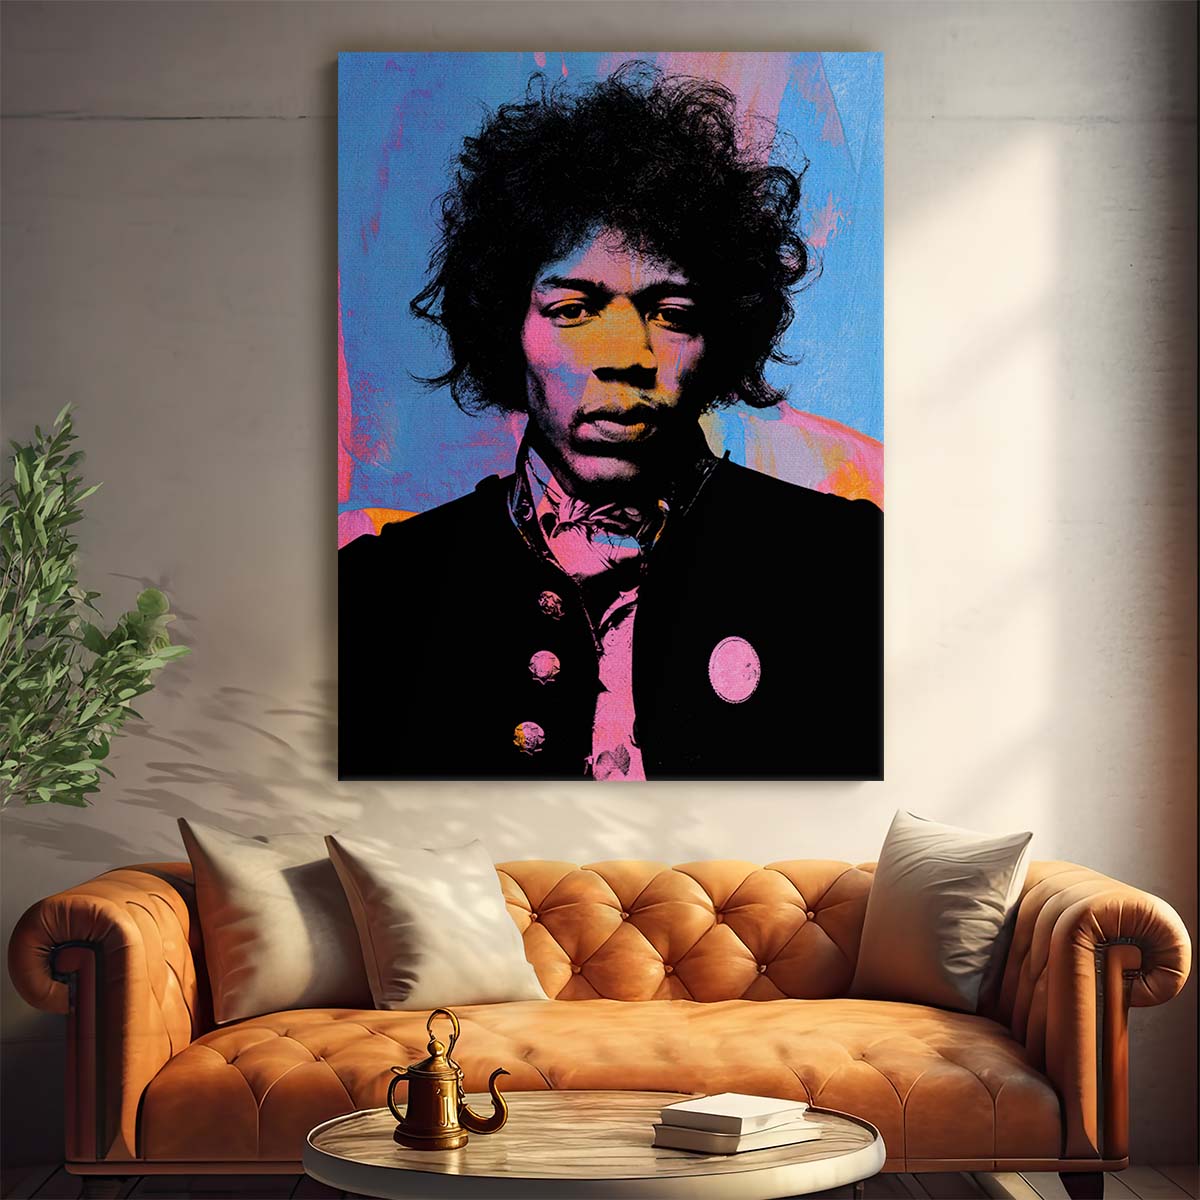 Jimi Hendrix Bright Colors Wall Art by Luxuriance Designs. Made in USA.